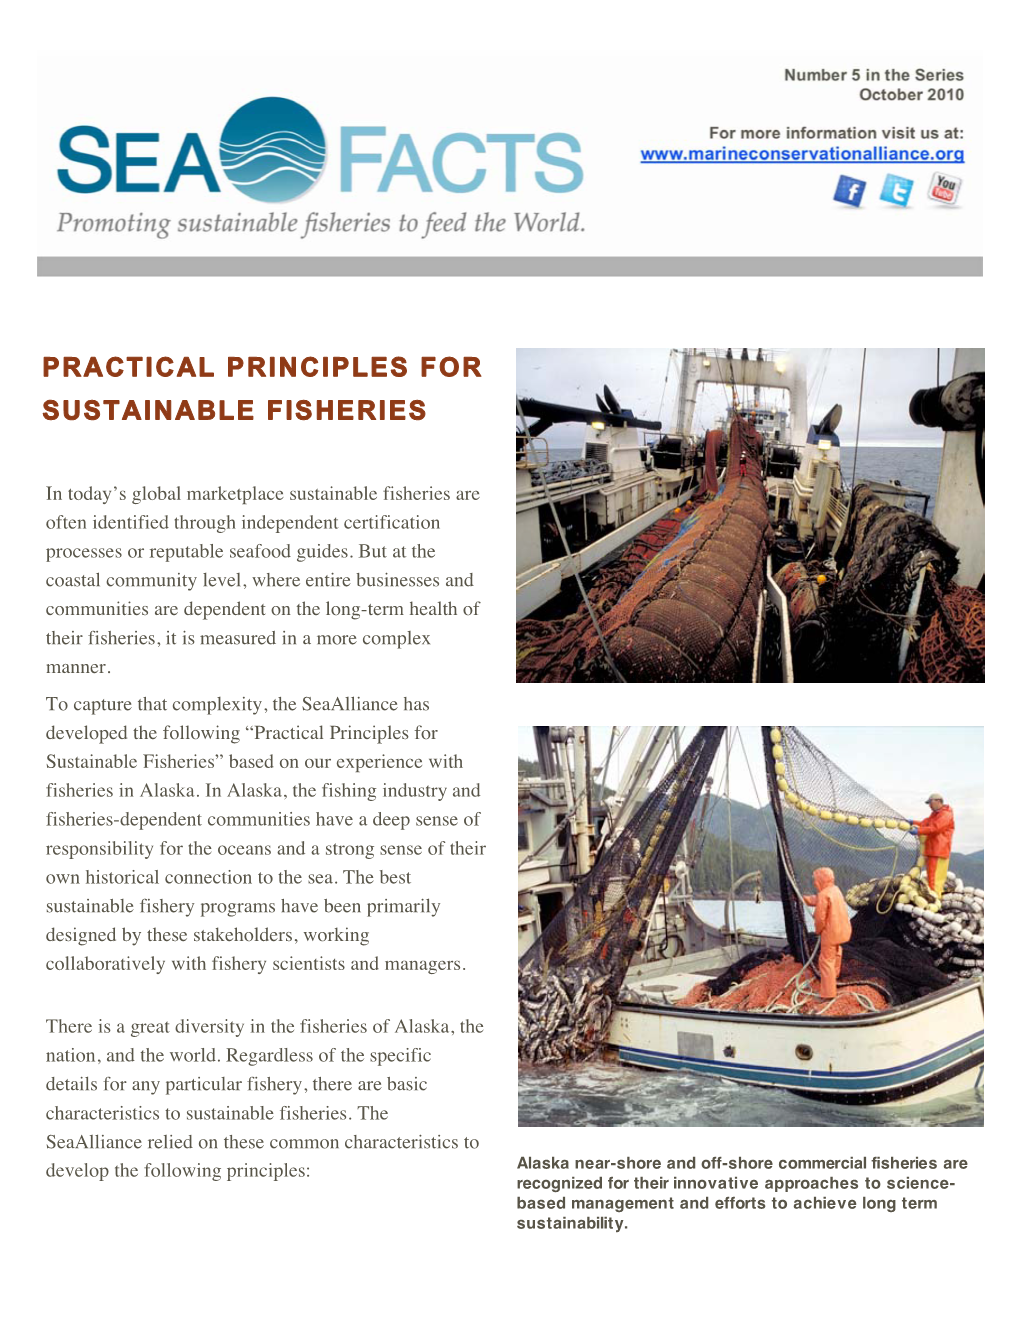 Practical Principles for Sustainable Fisheries